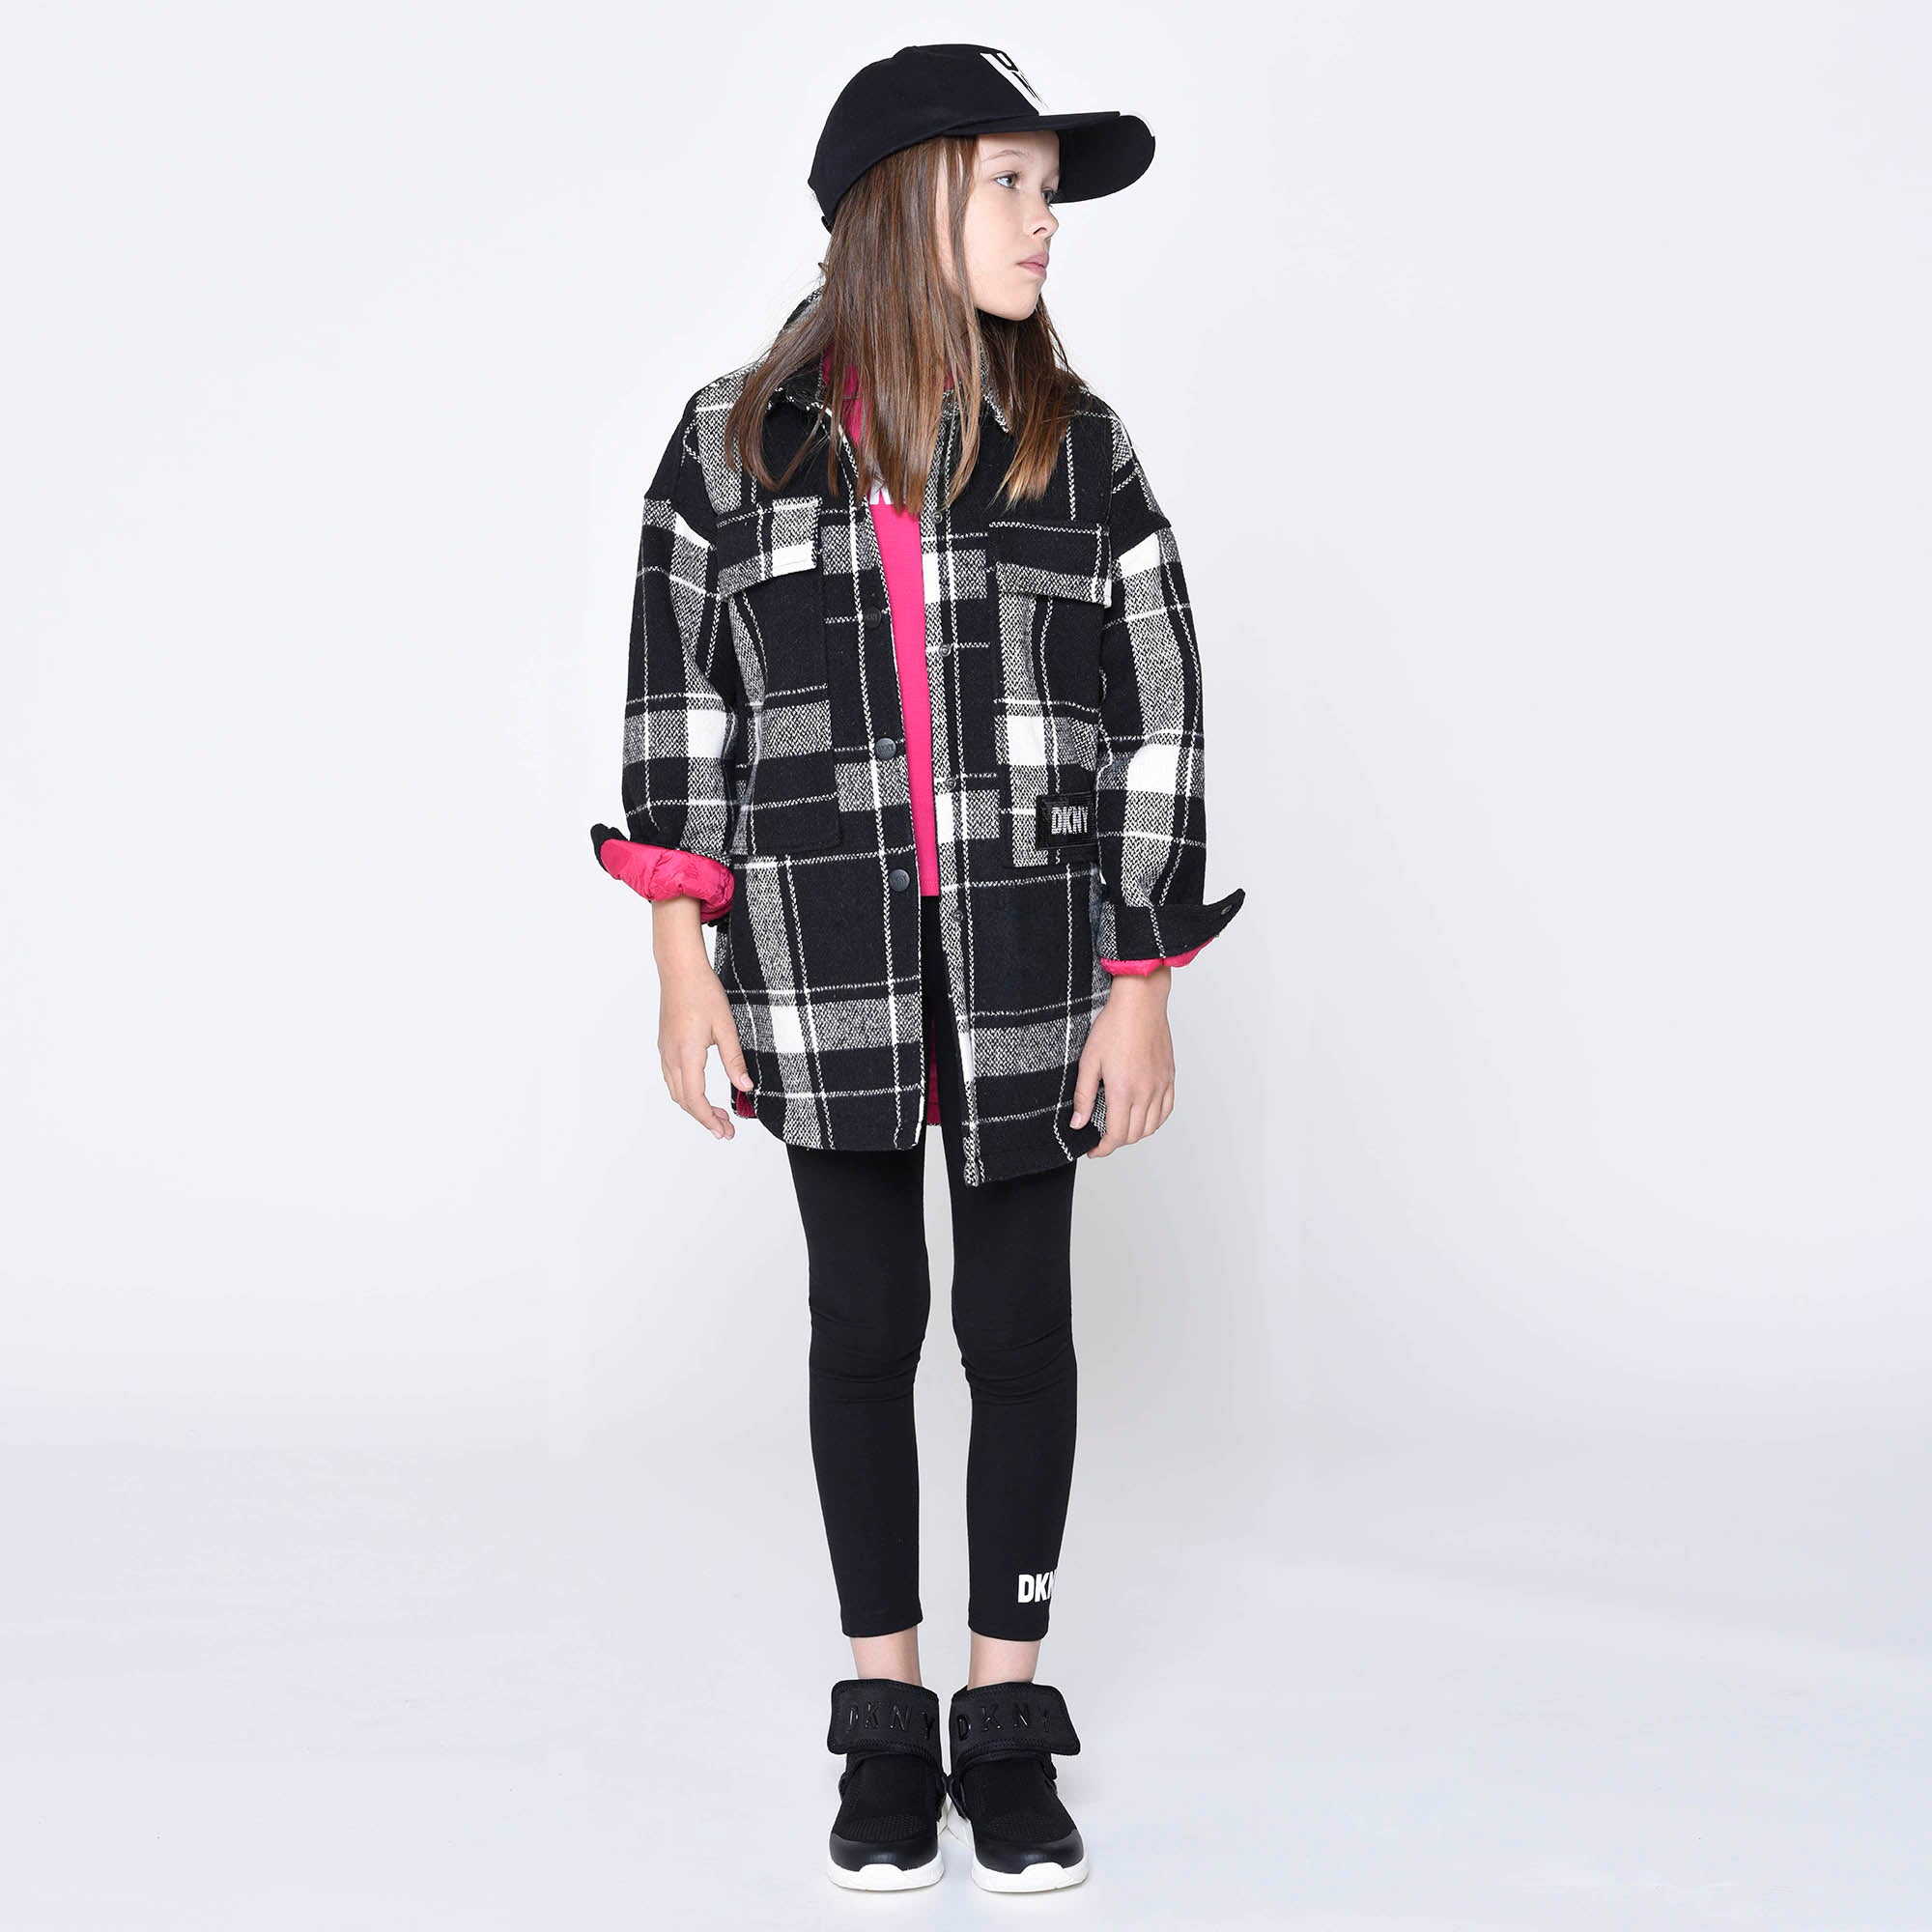 DKNY Black and White Flannel